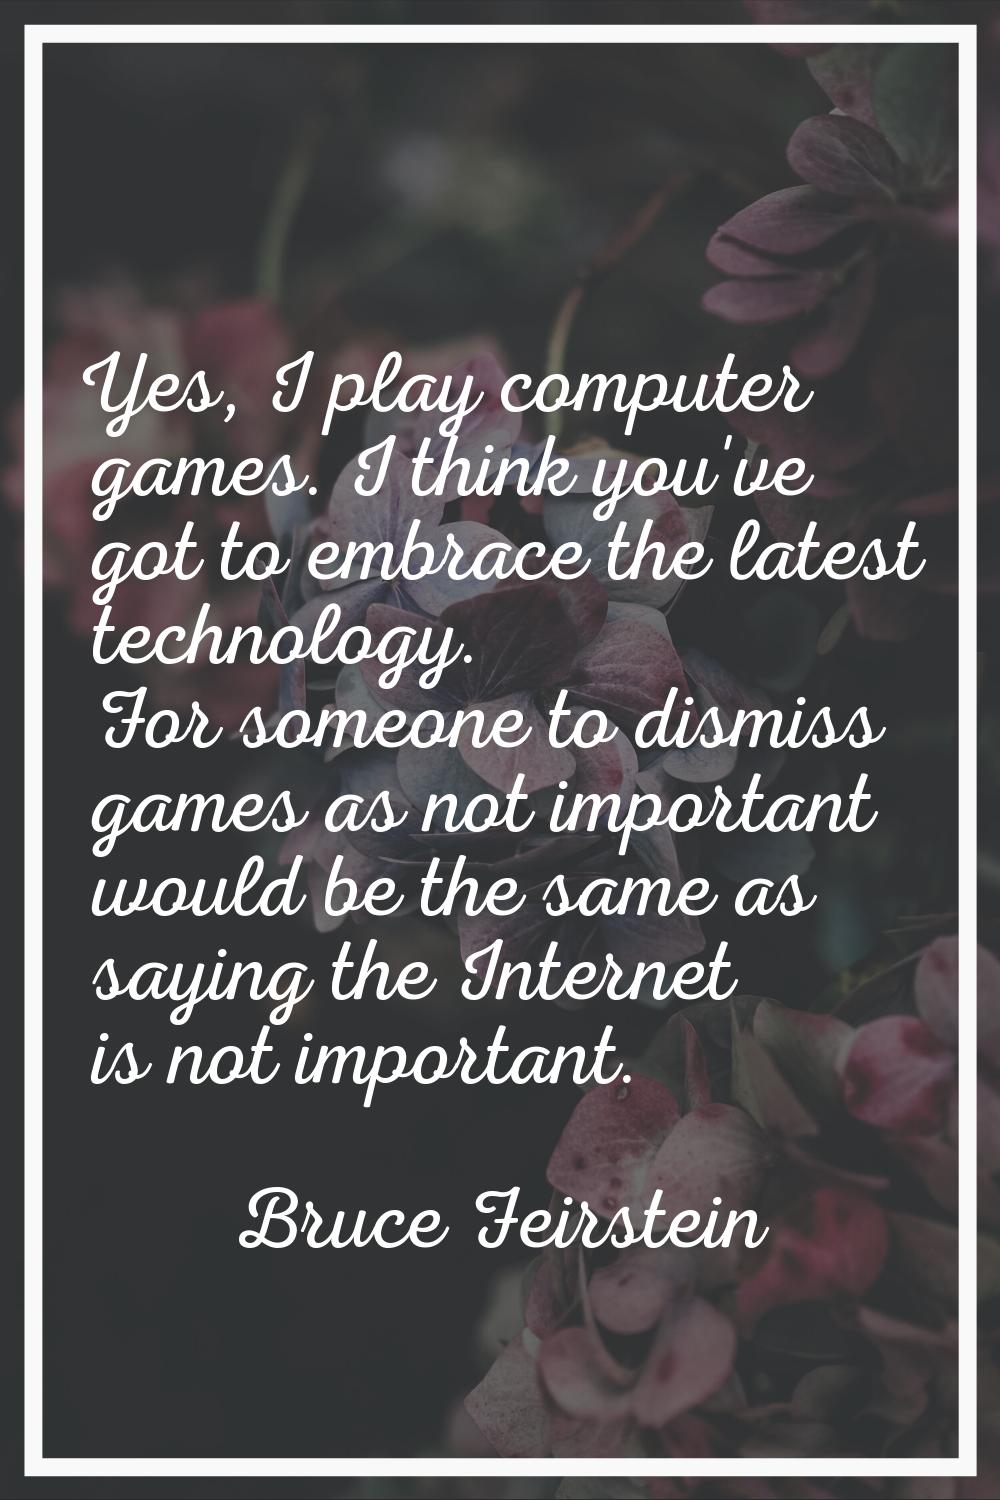 Yes, I play computer games. I think you've got to embrace the latest technology. For someone to dis